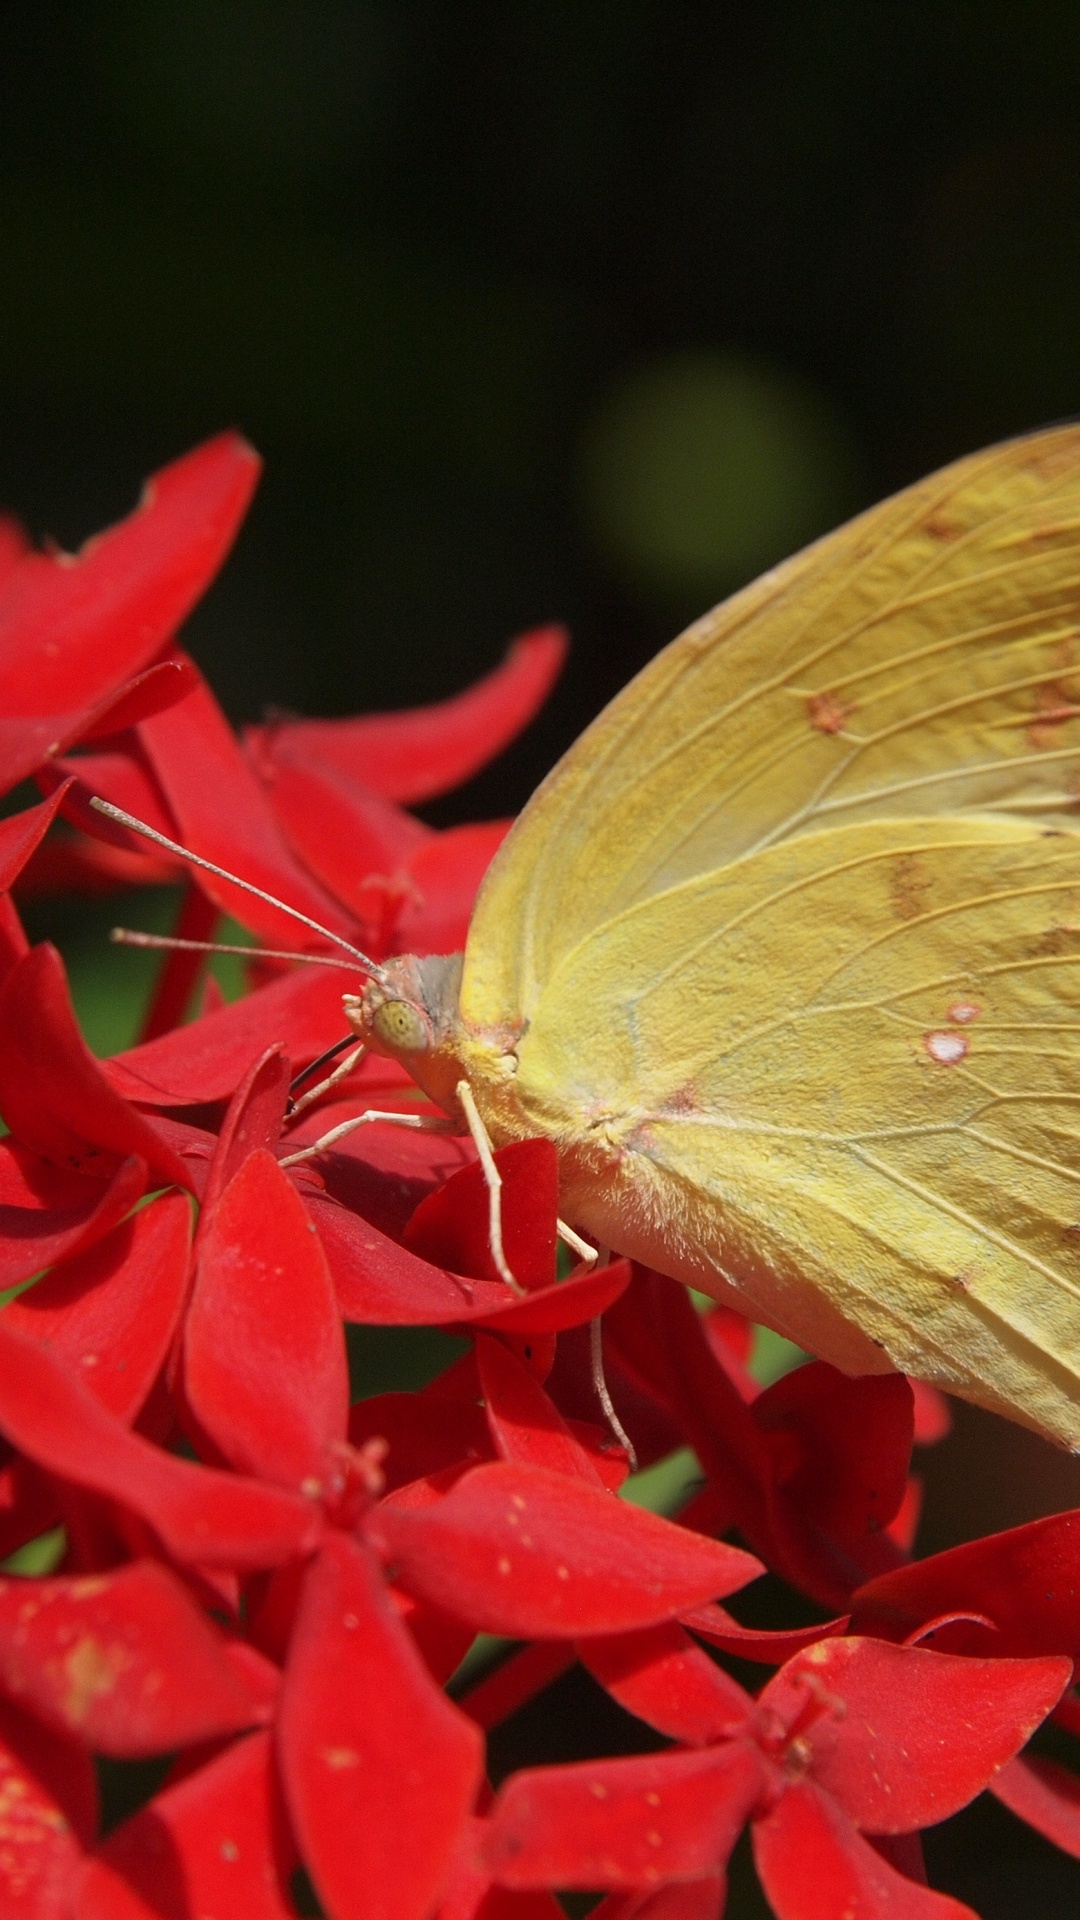 Yellow Butterfly Perched on Red Flower in Close up Photography During Daytime. Wallpaper in 1080x1920 Resolution